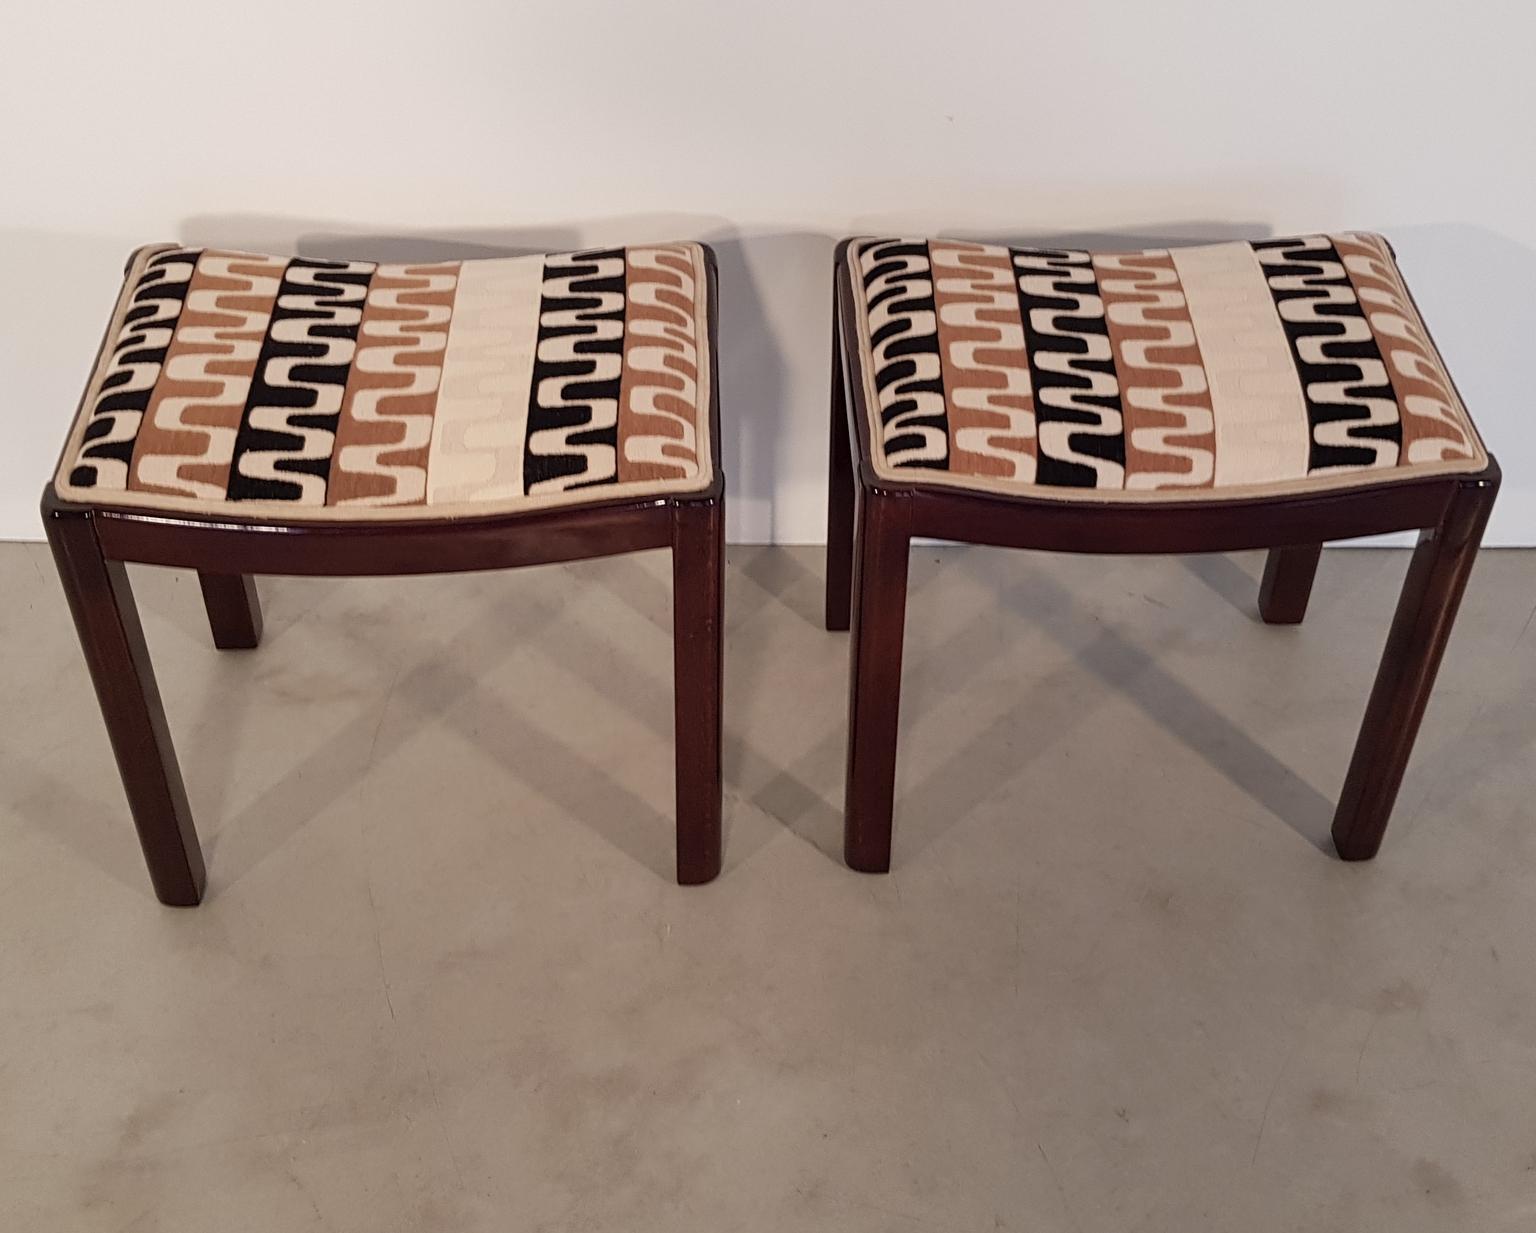 Hungarian Pair of Art Deco Walnut Upholstered Stools, 1930s, Hungary For Sale